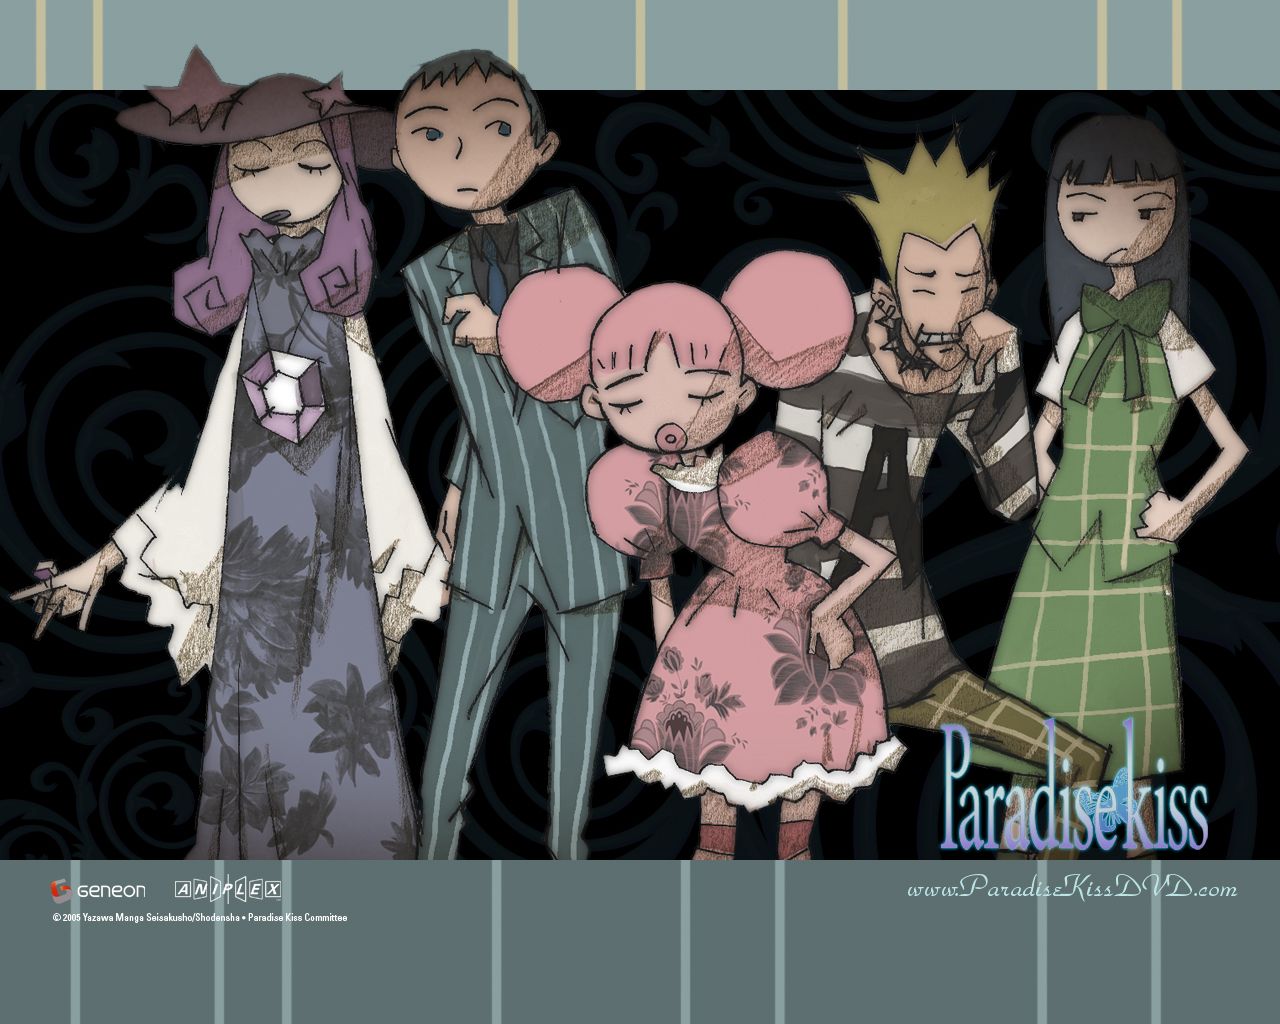 Paradise Kiss Backgrounds on Wallpapers Vista